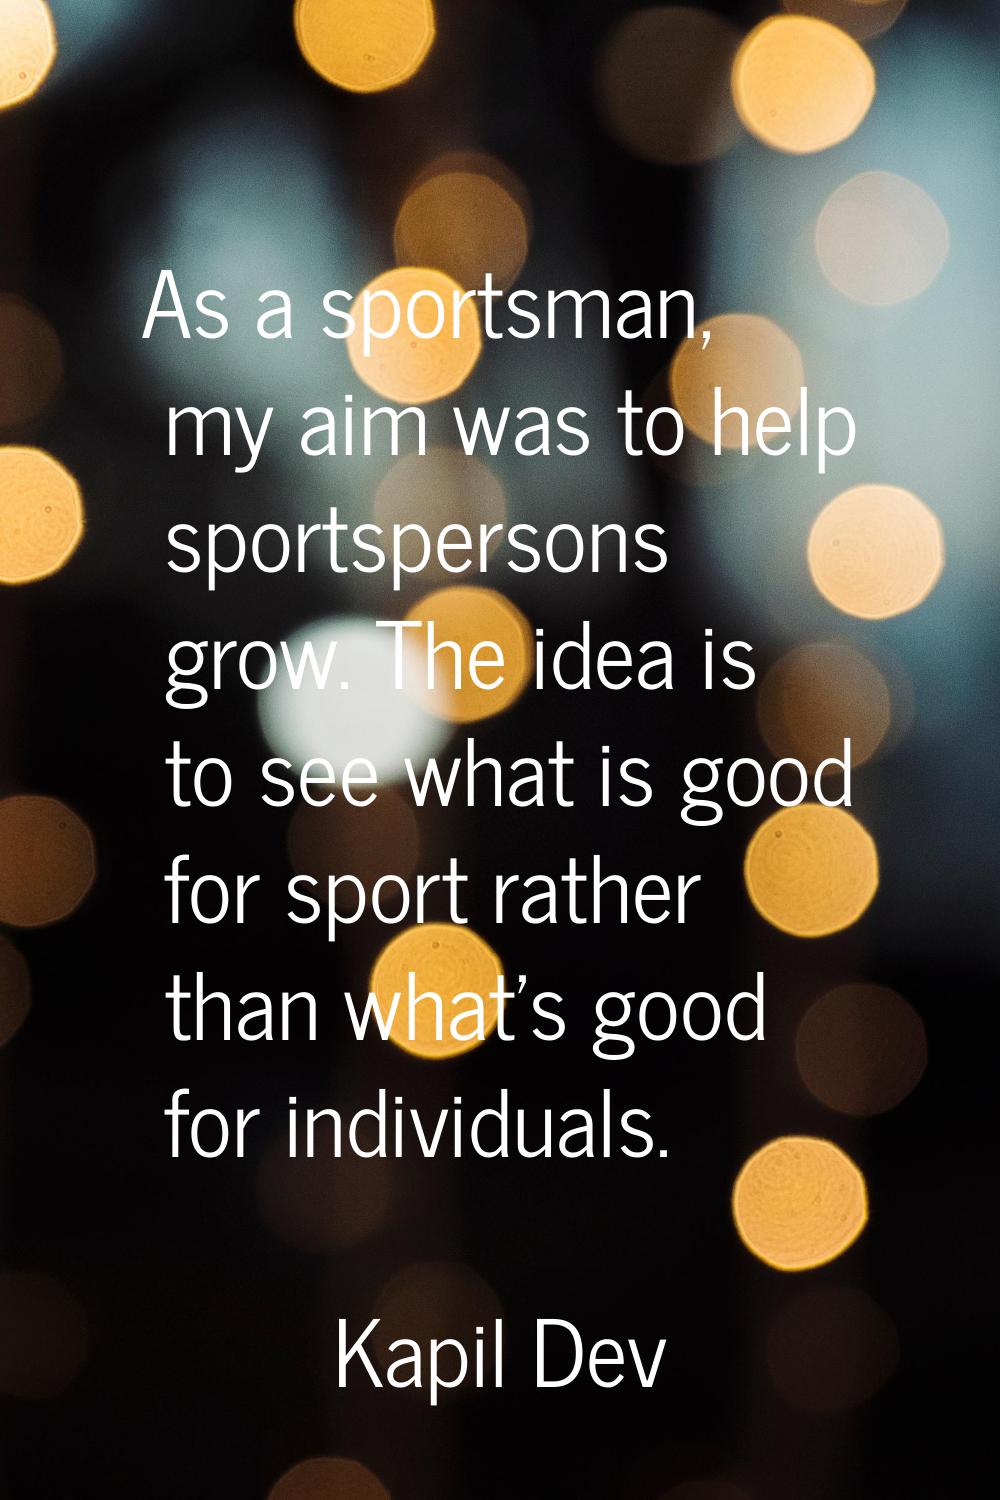 As a sportsman, my aim was to help sportspersons grow. The idea is to see what is good for sport ra